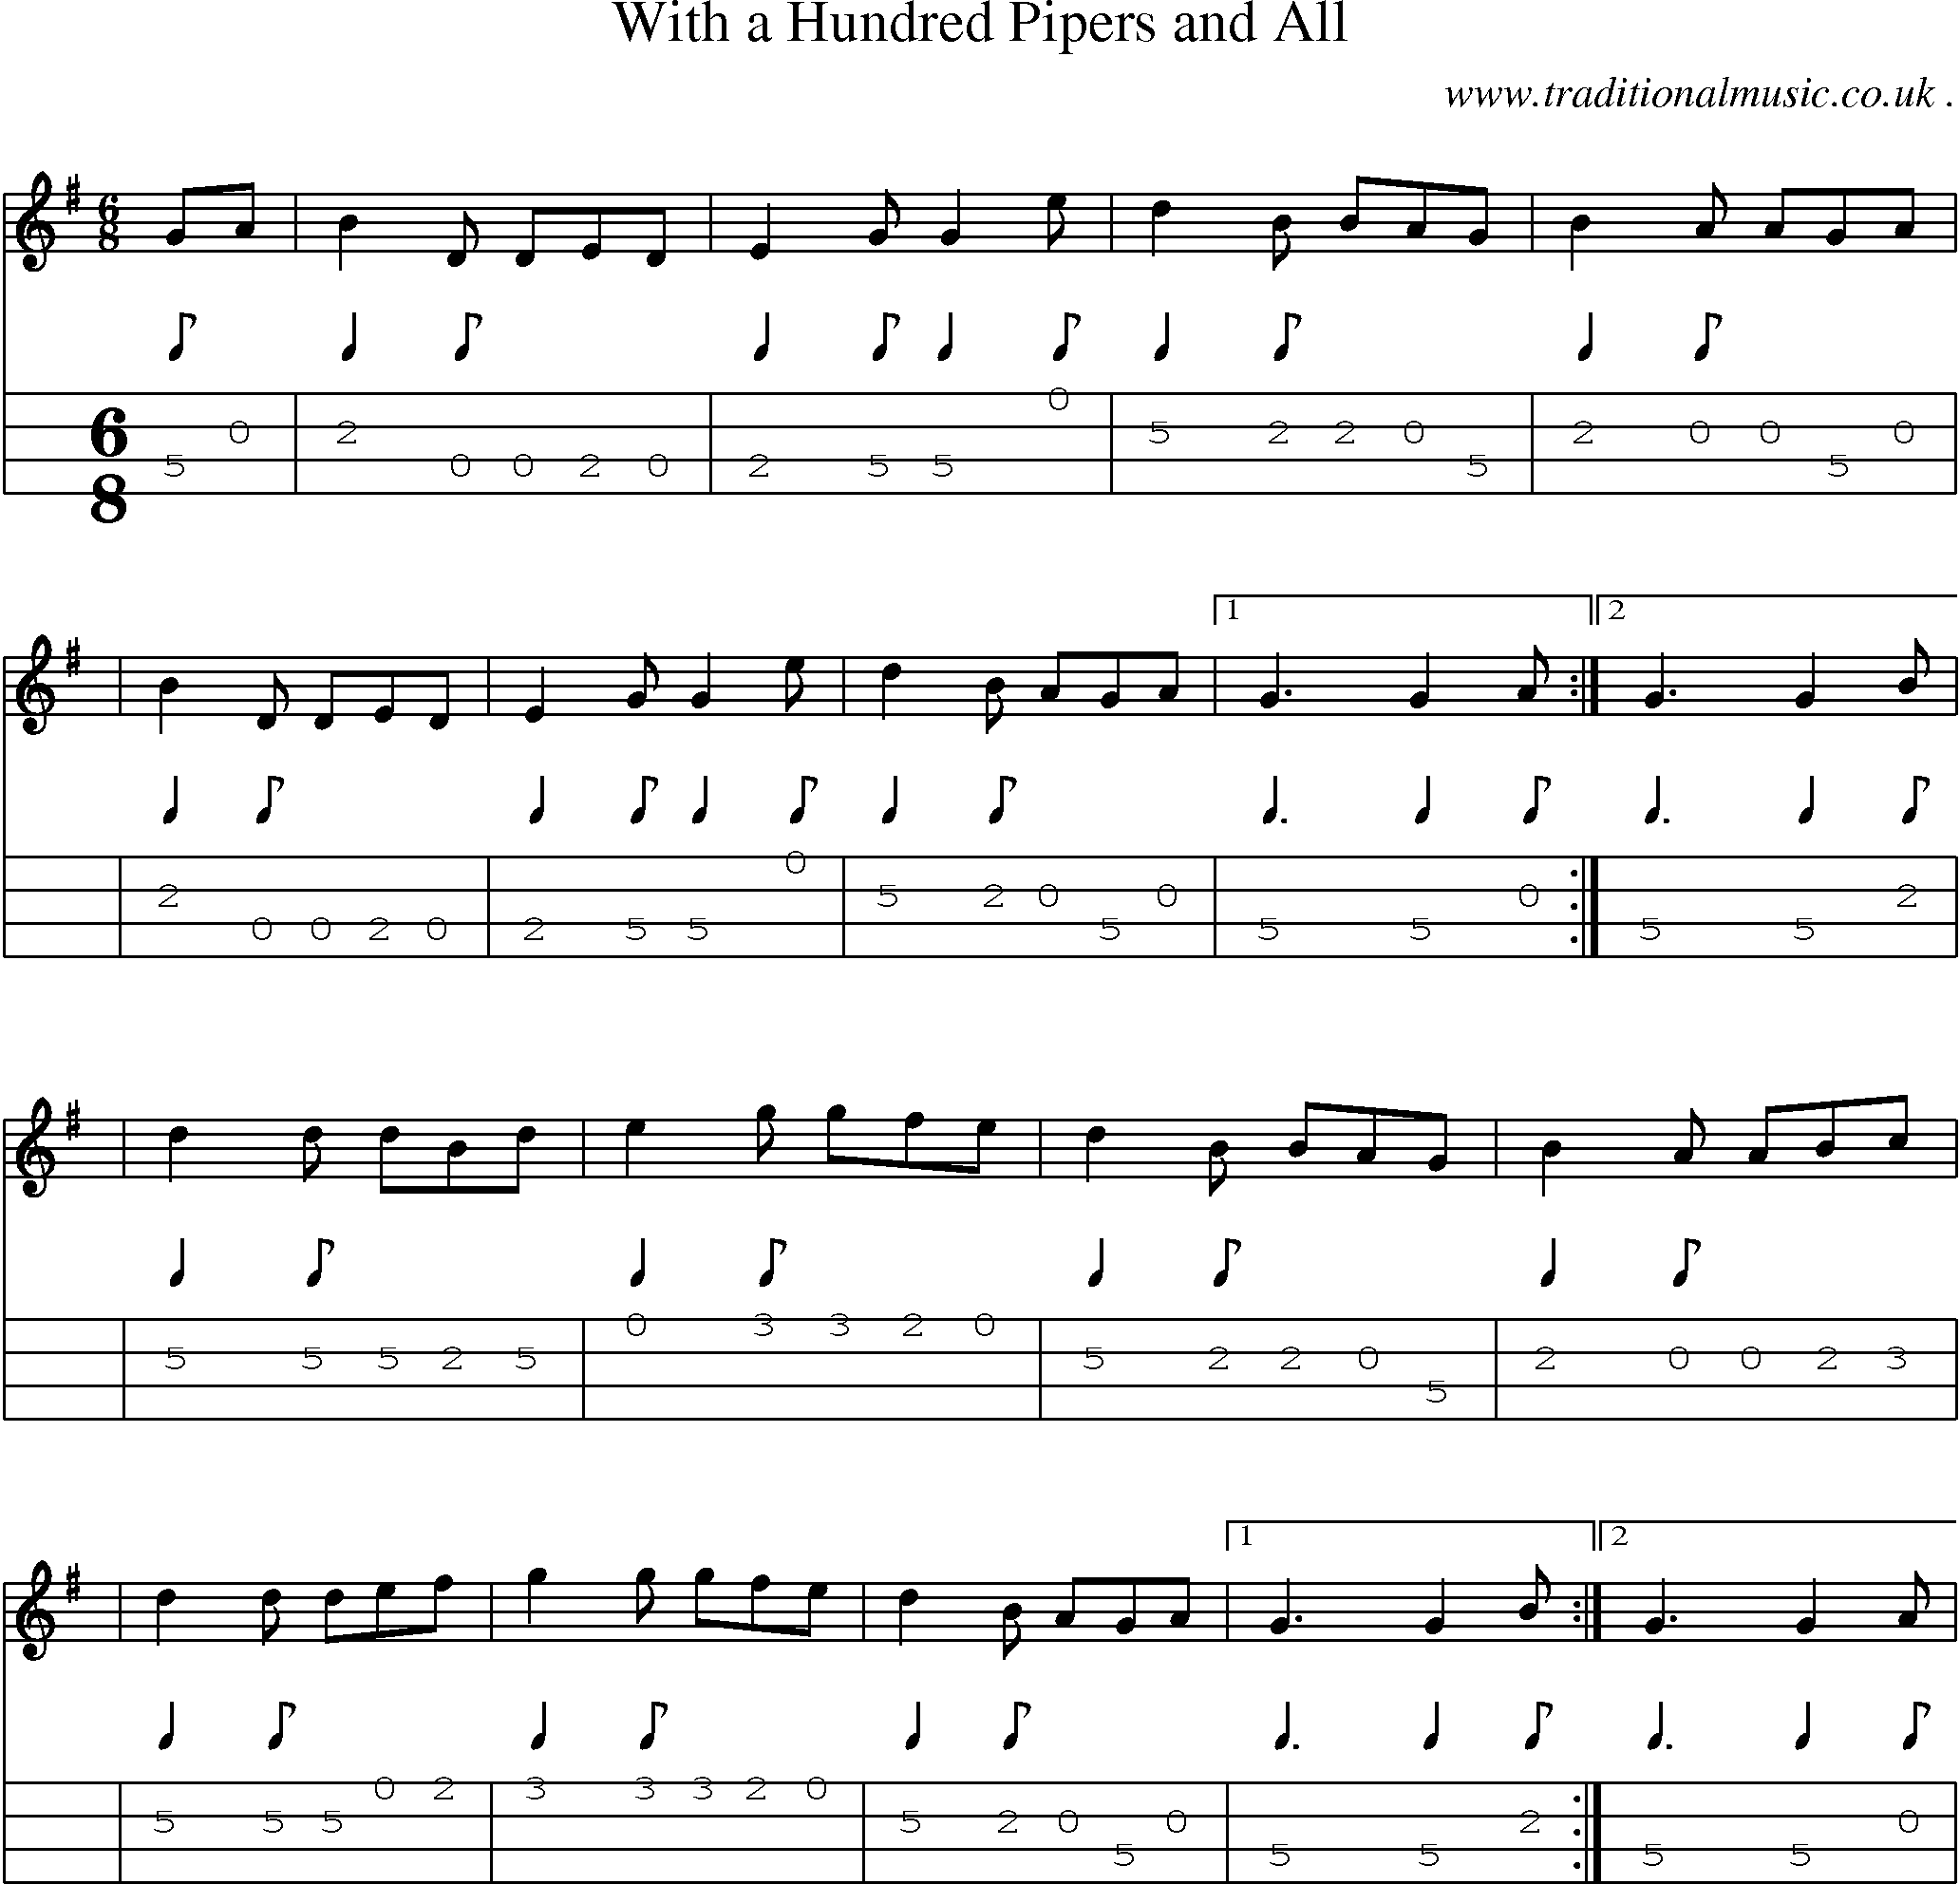 Sheet-music  score, Chords and Mandolin Tabs for With A Hundred Pipers And All